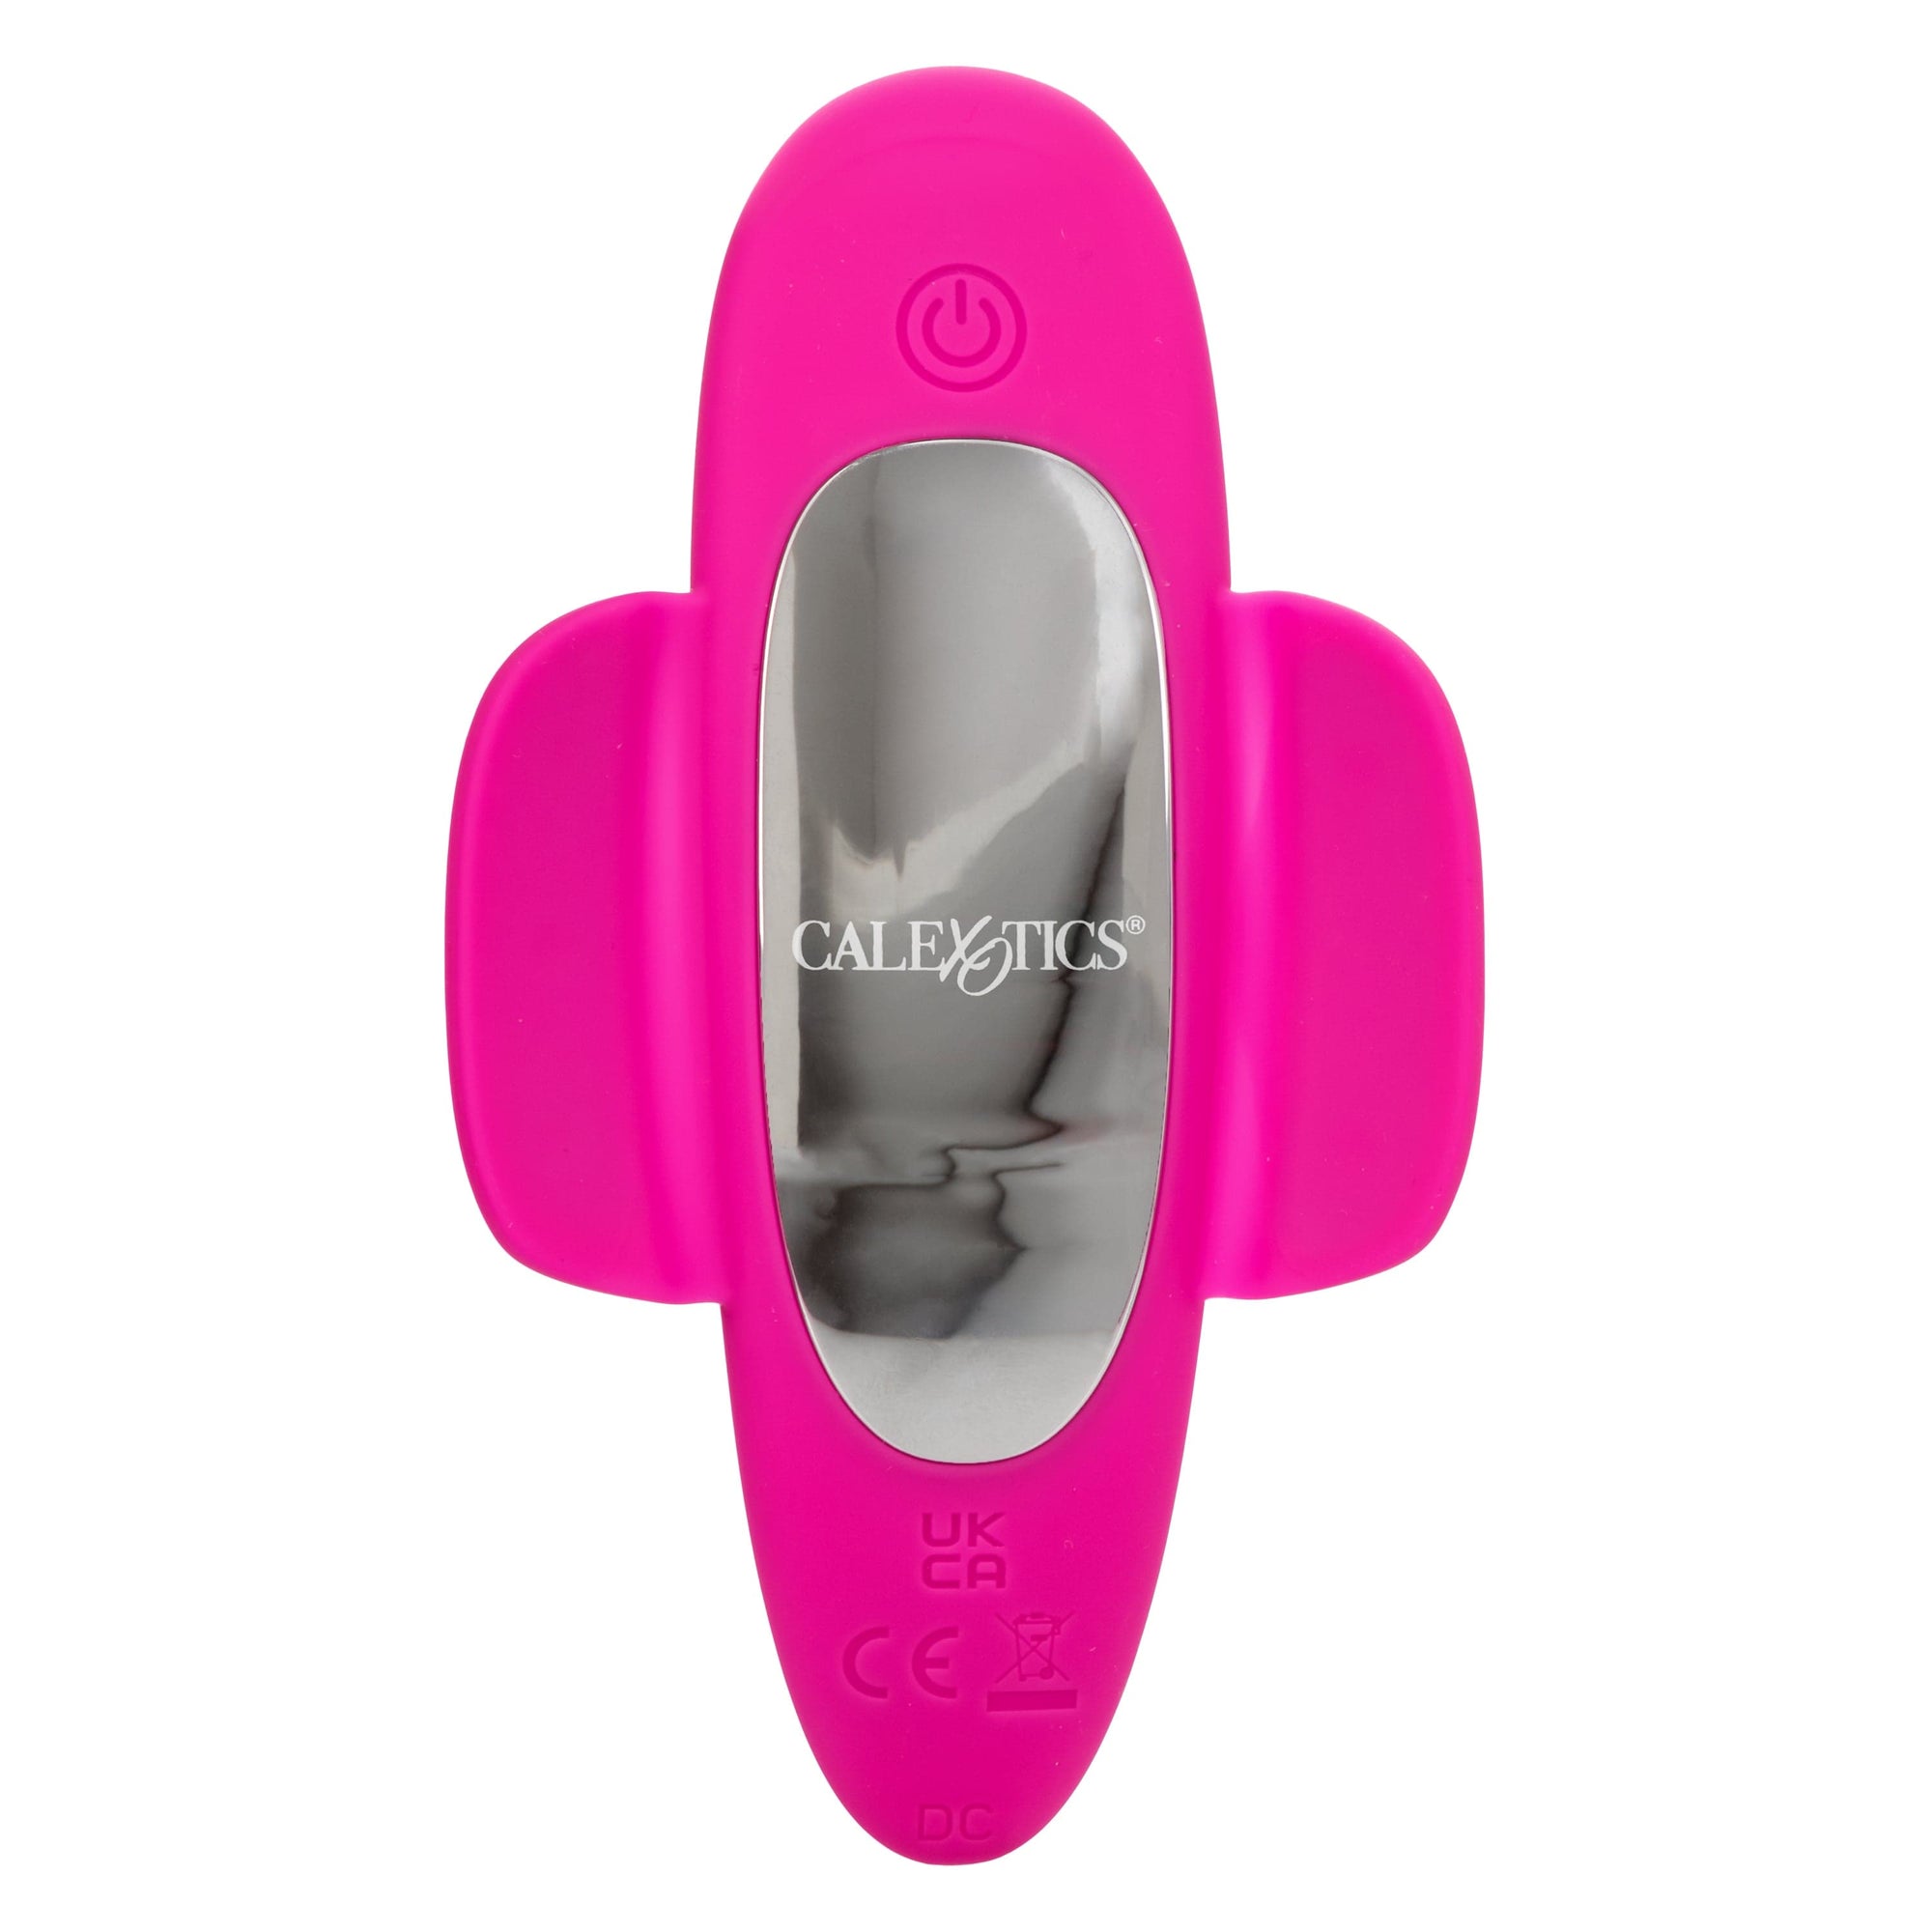 California Exotics - Lock N Play Remote Flicker Panty Teaser Vibrator (Pink) -  Panties Massager Remote Control (Vibration) Rechargeable  Durio.sg